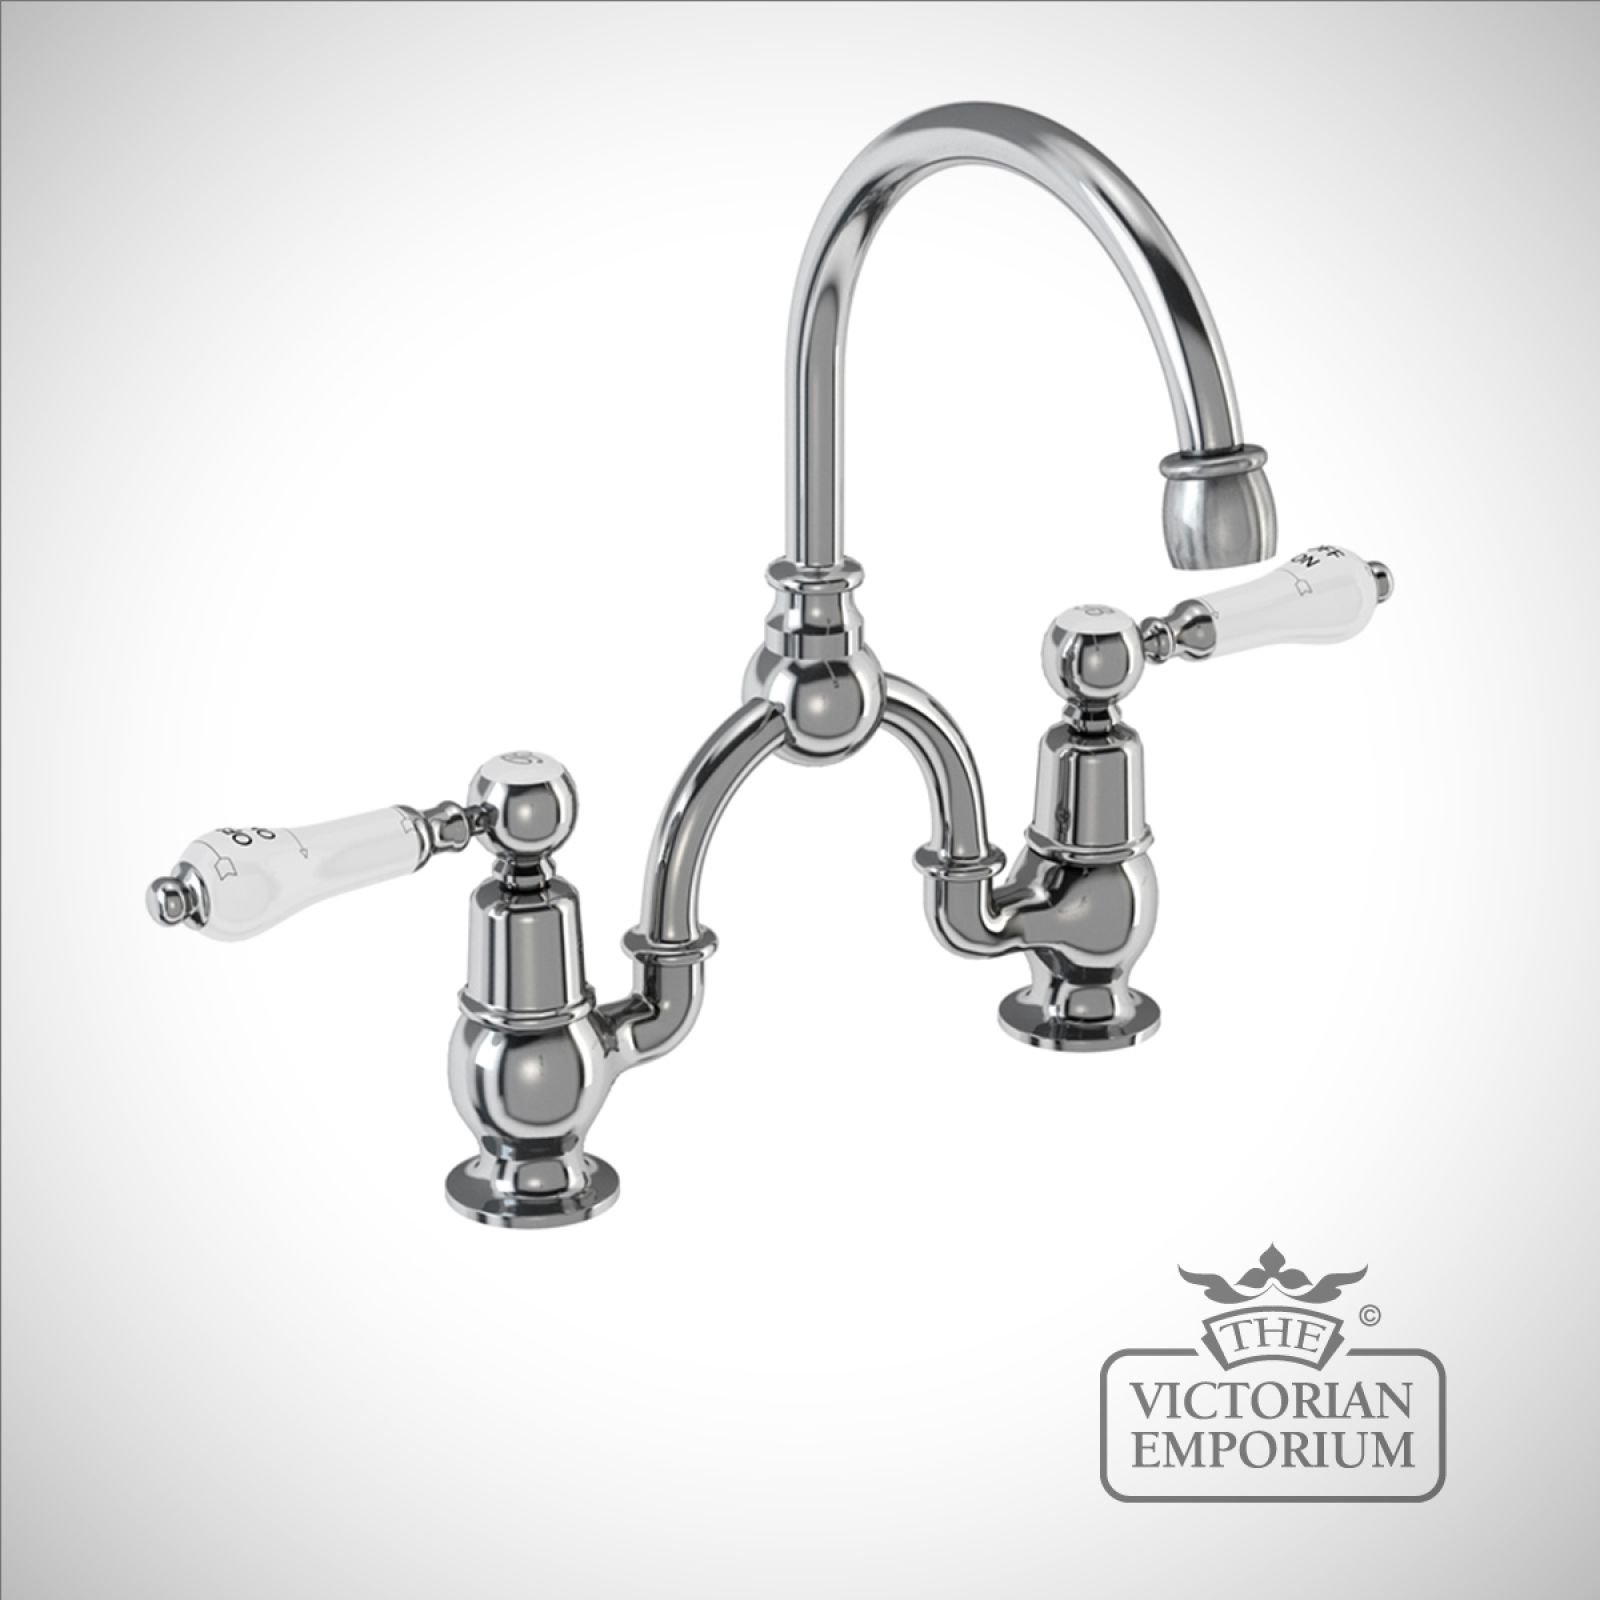 Knightsbridge 2 tap hole arch mixer with curved spout